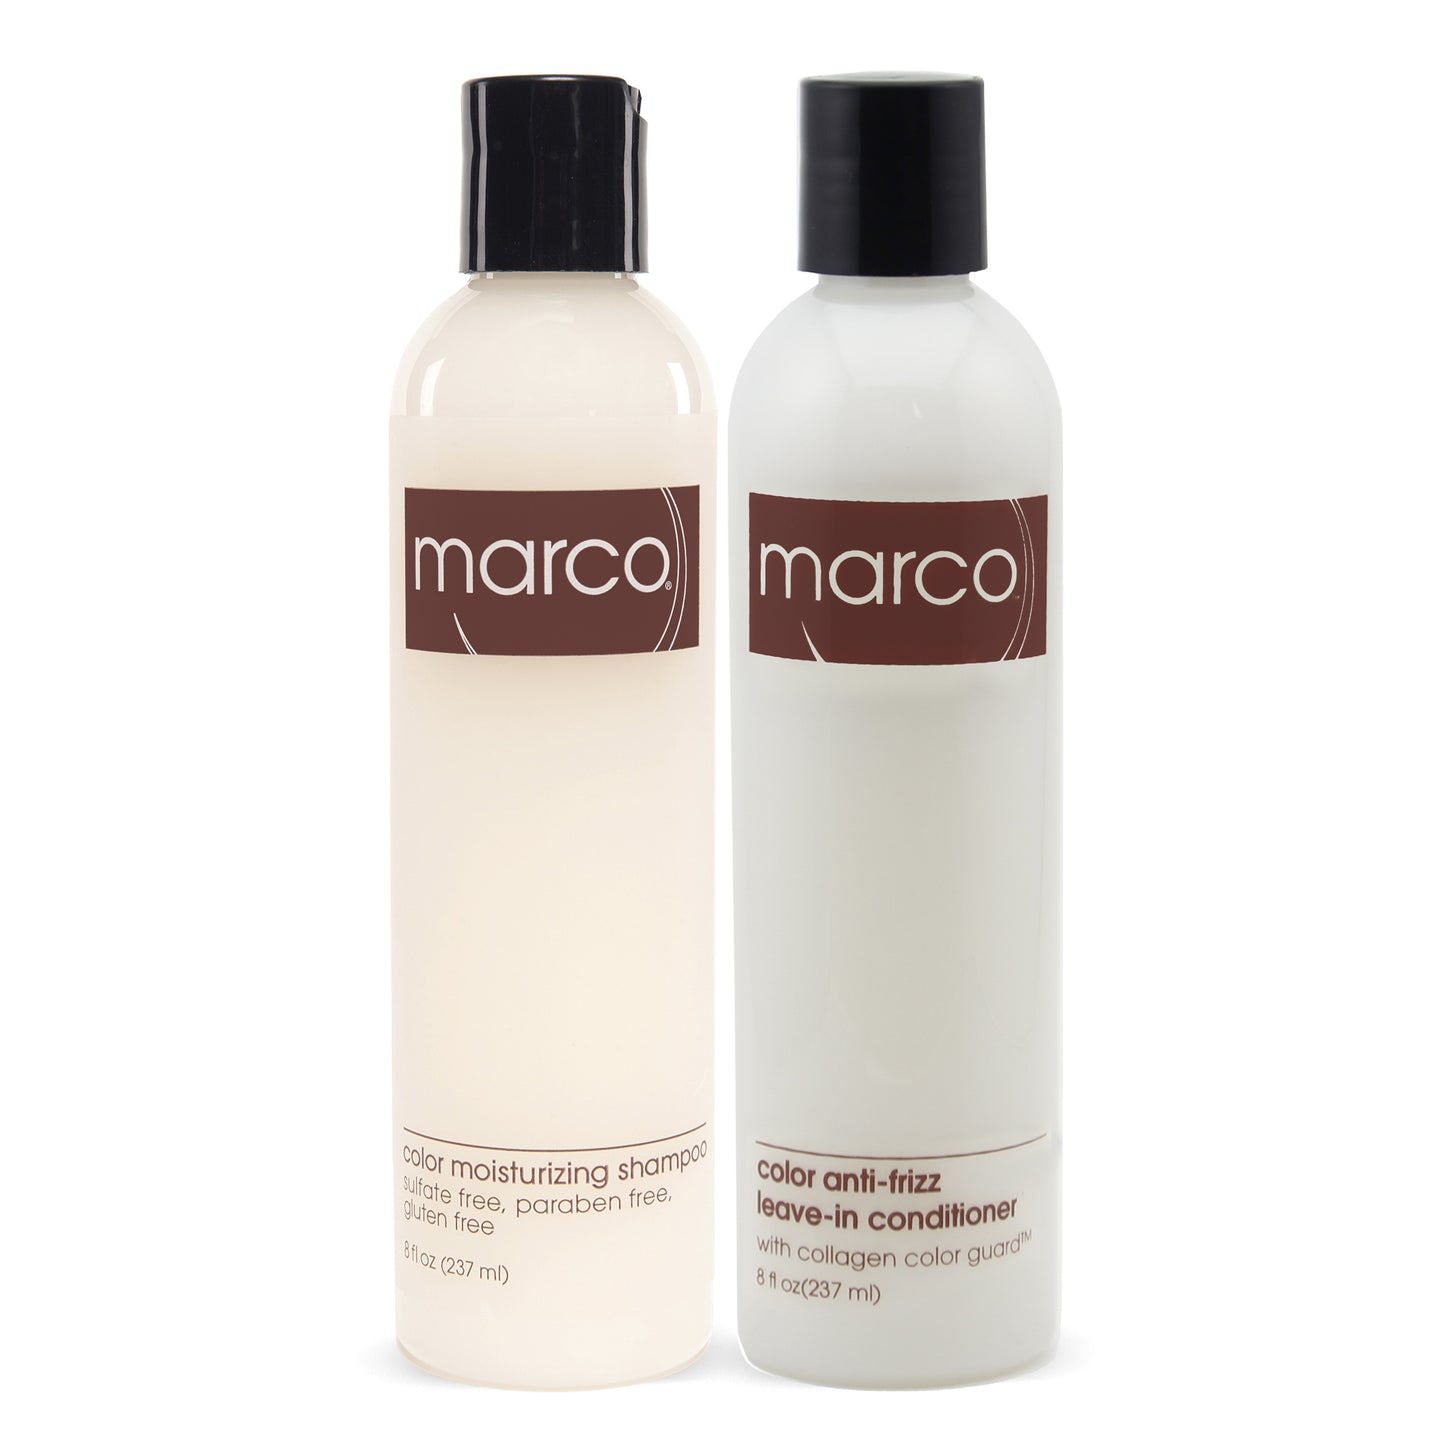 Two Marco bottles, “color moisturizing shampoo” + “color anti-frizz leave-in conditioner”